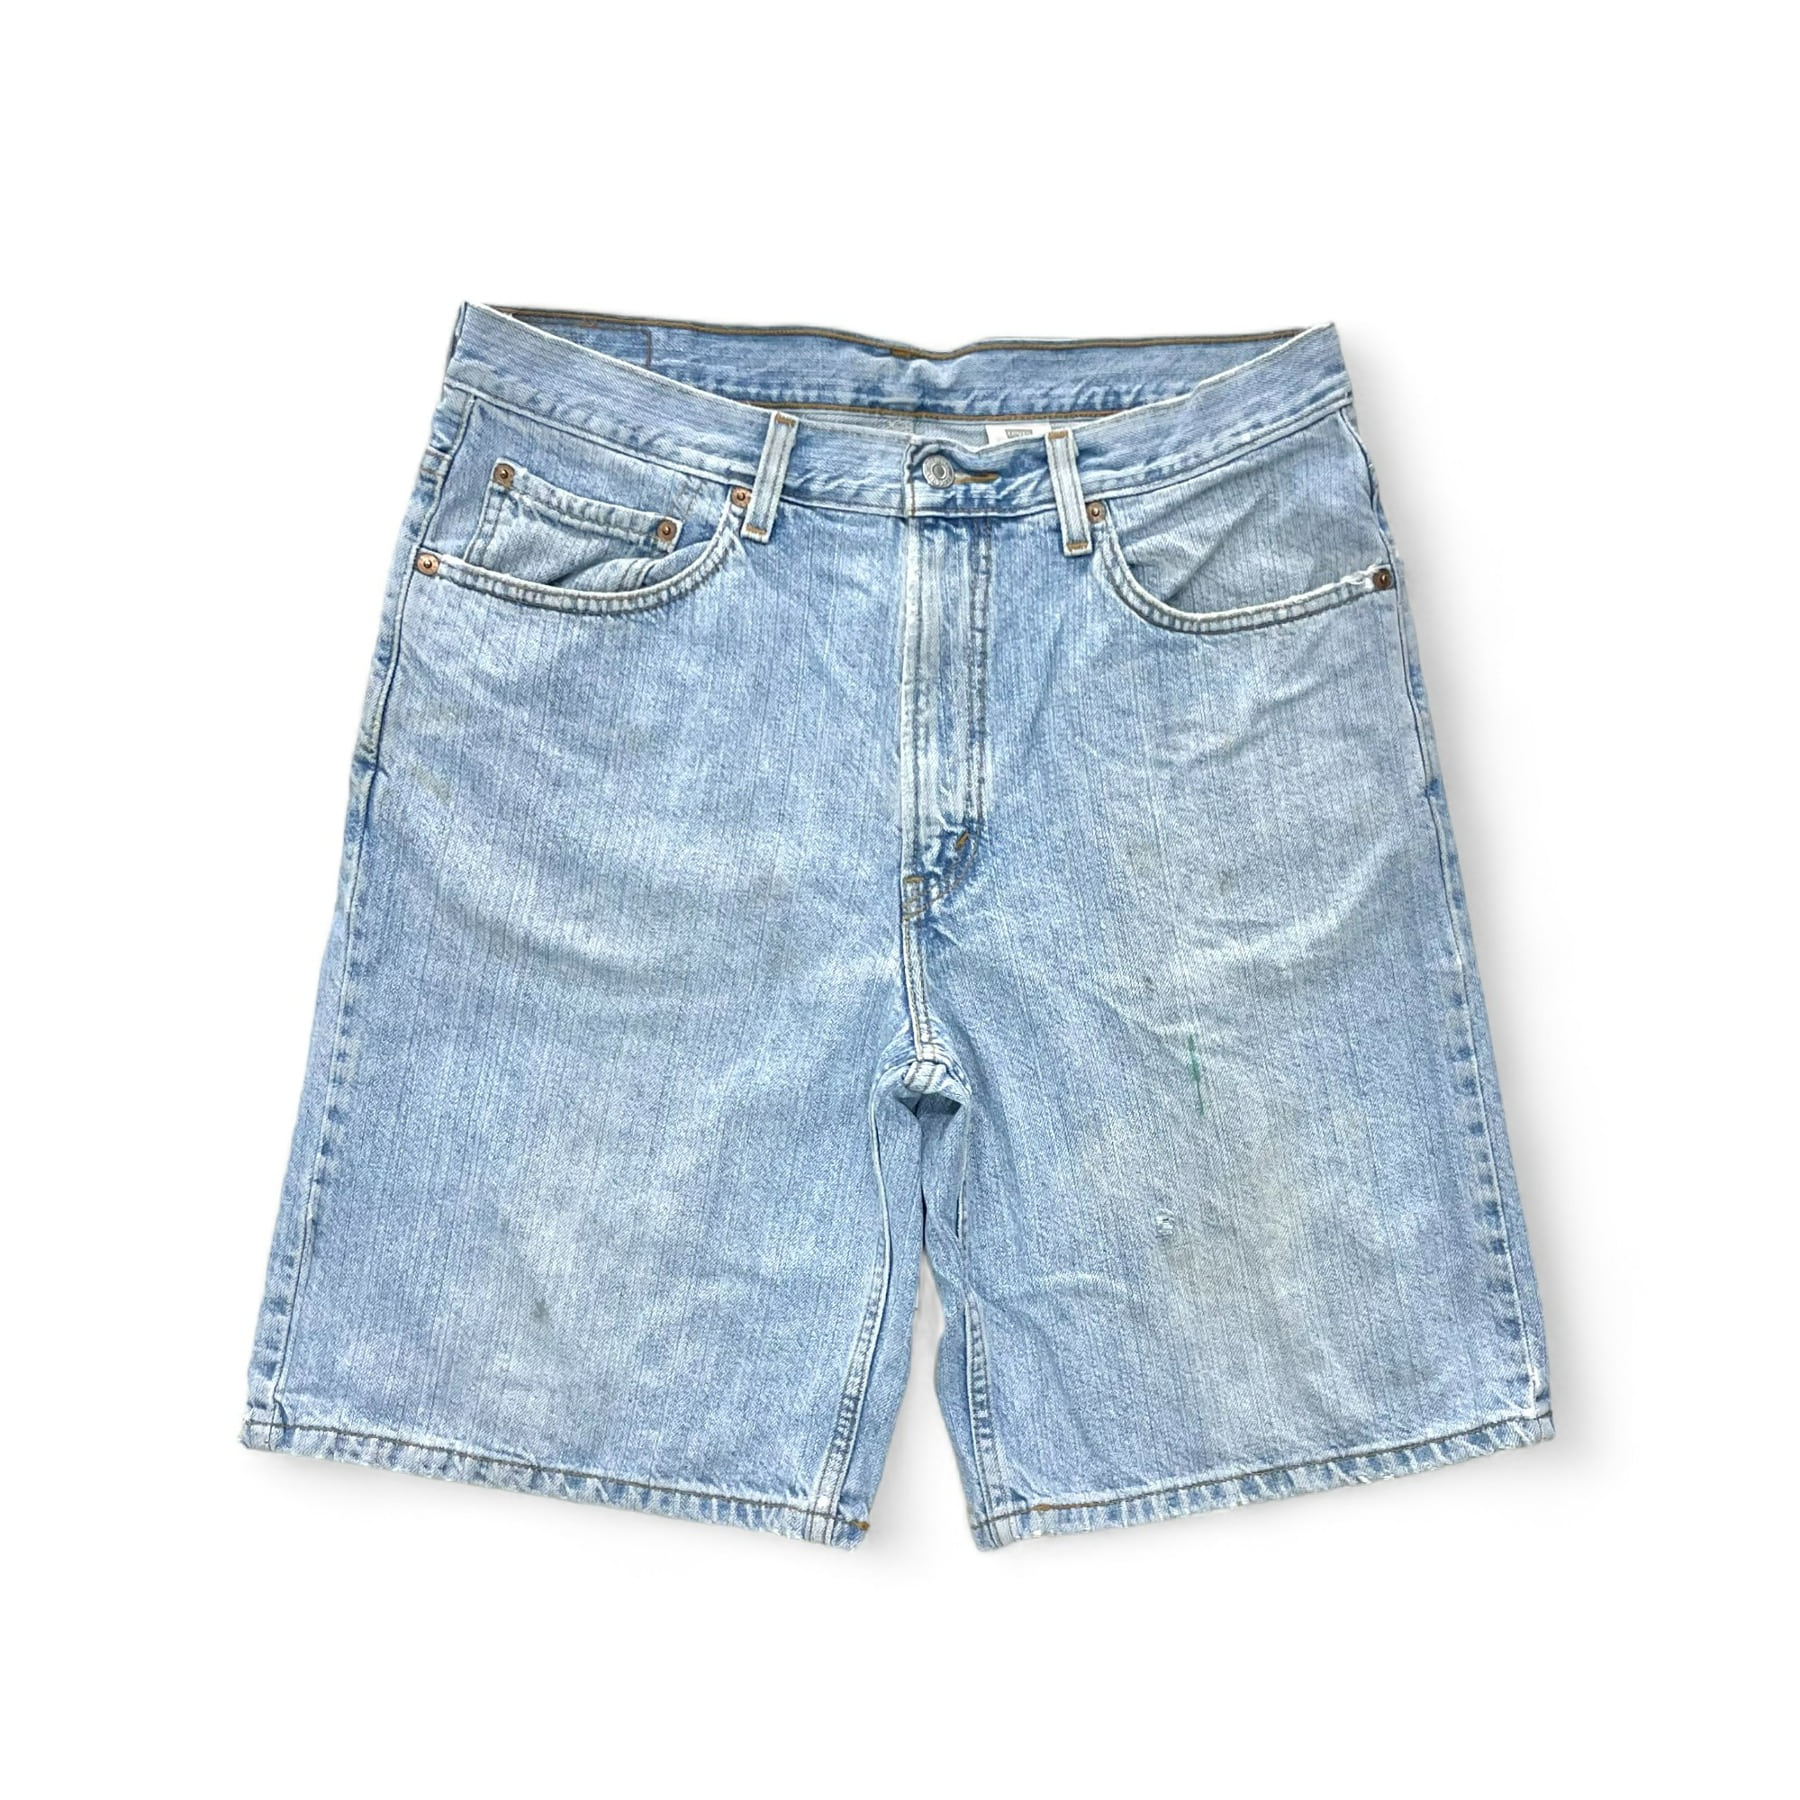 00&#039;s Levis 550 Shorts - 34inch